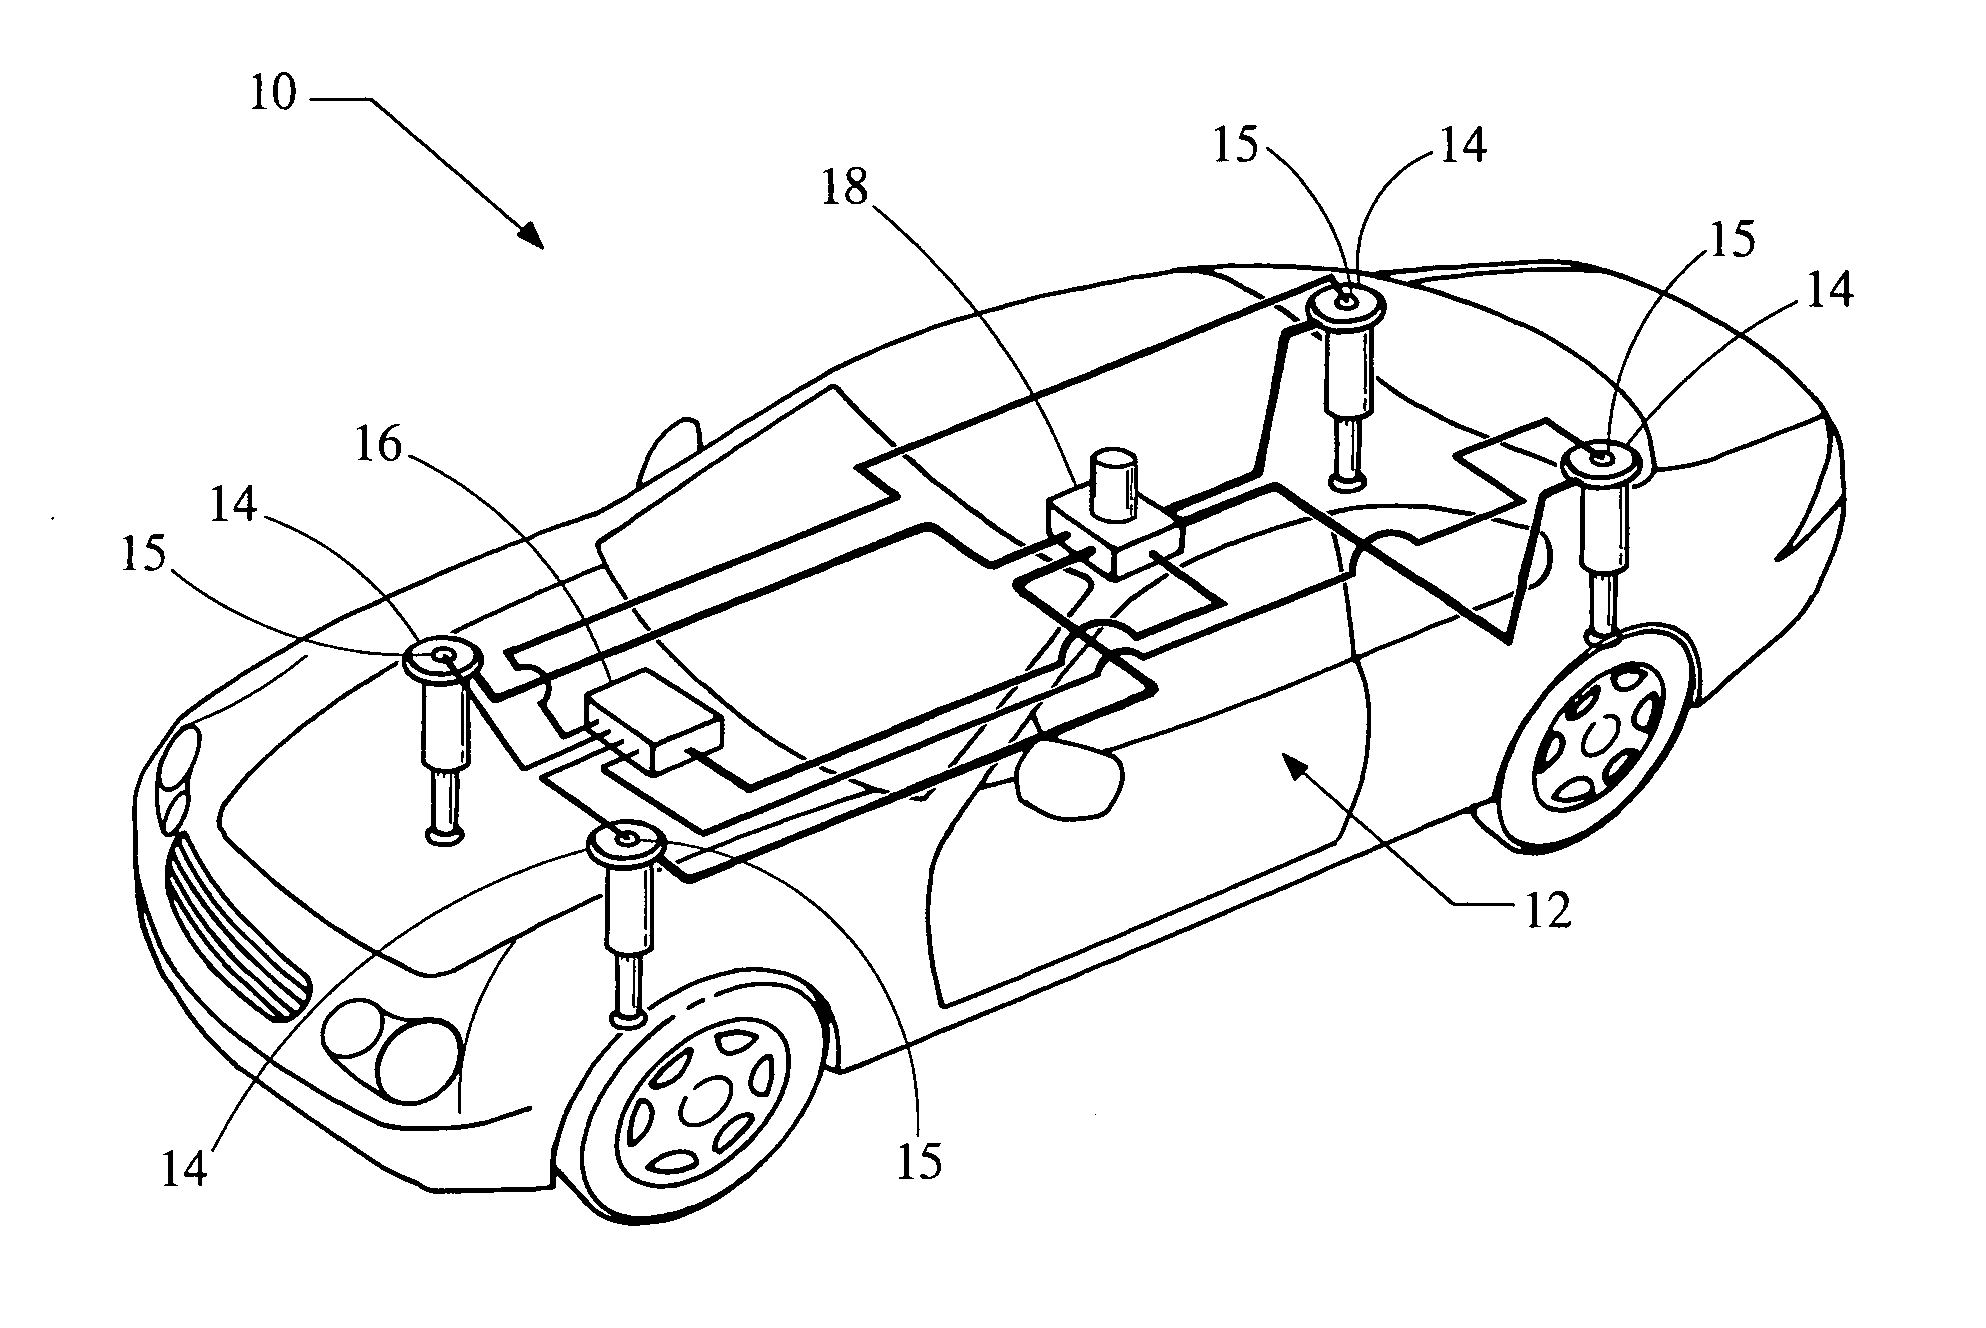 Frequency domain ride control for low bandwidth active suspension systems